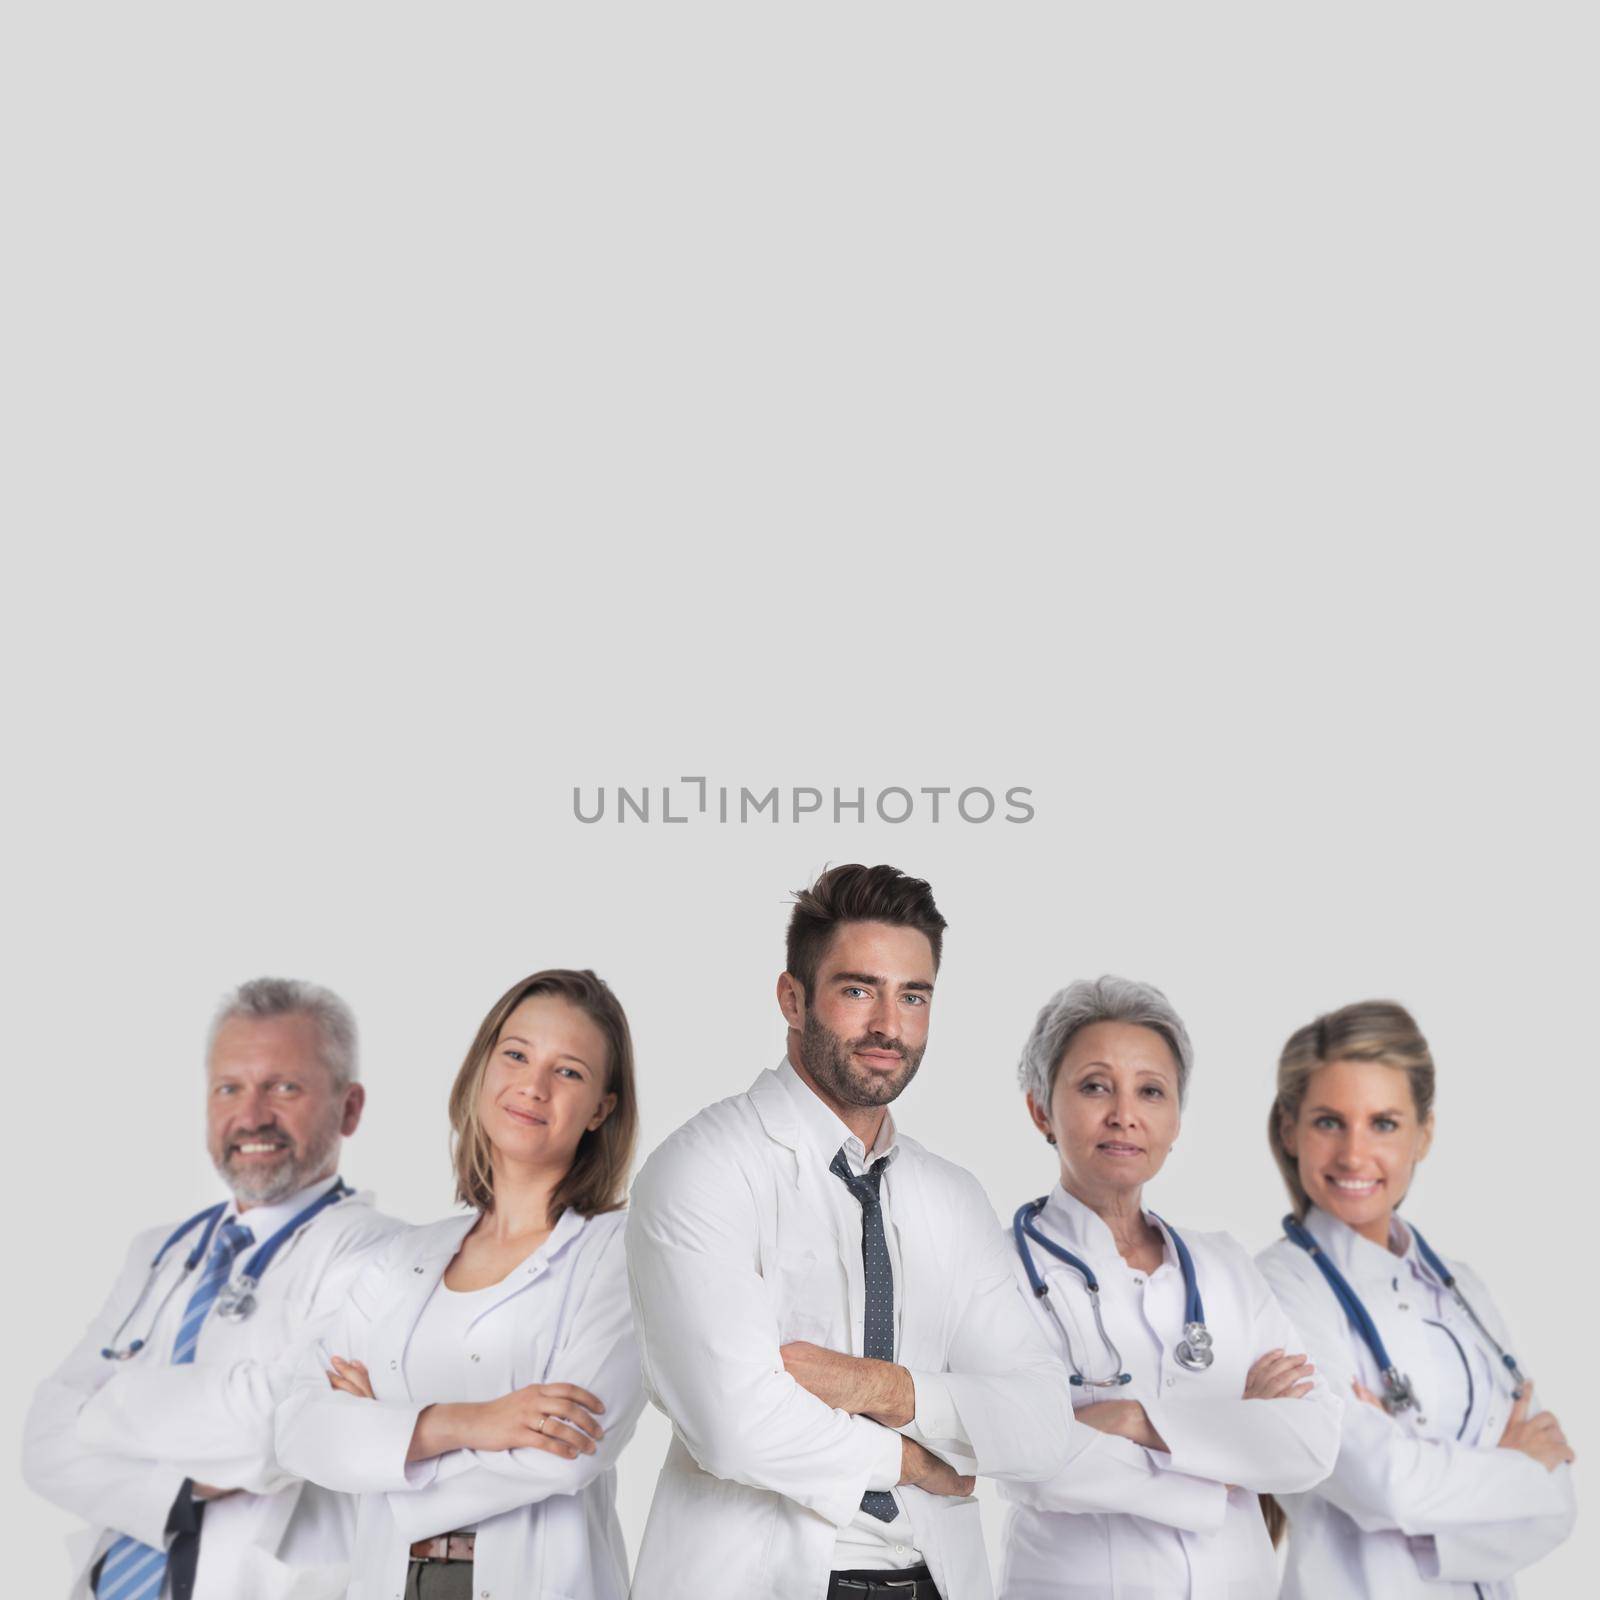 Group of successful medical doctors in labcoat uniform standing together with arms folded isolated on gray background with copy space for text